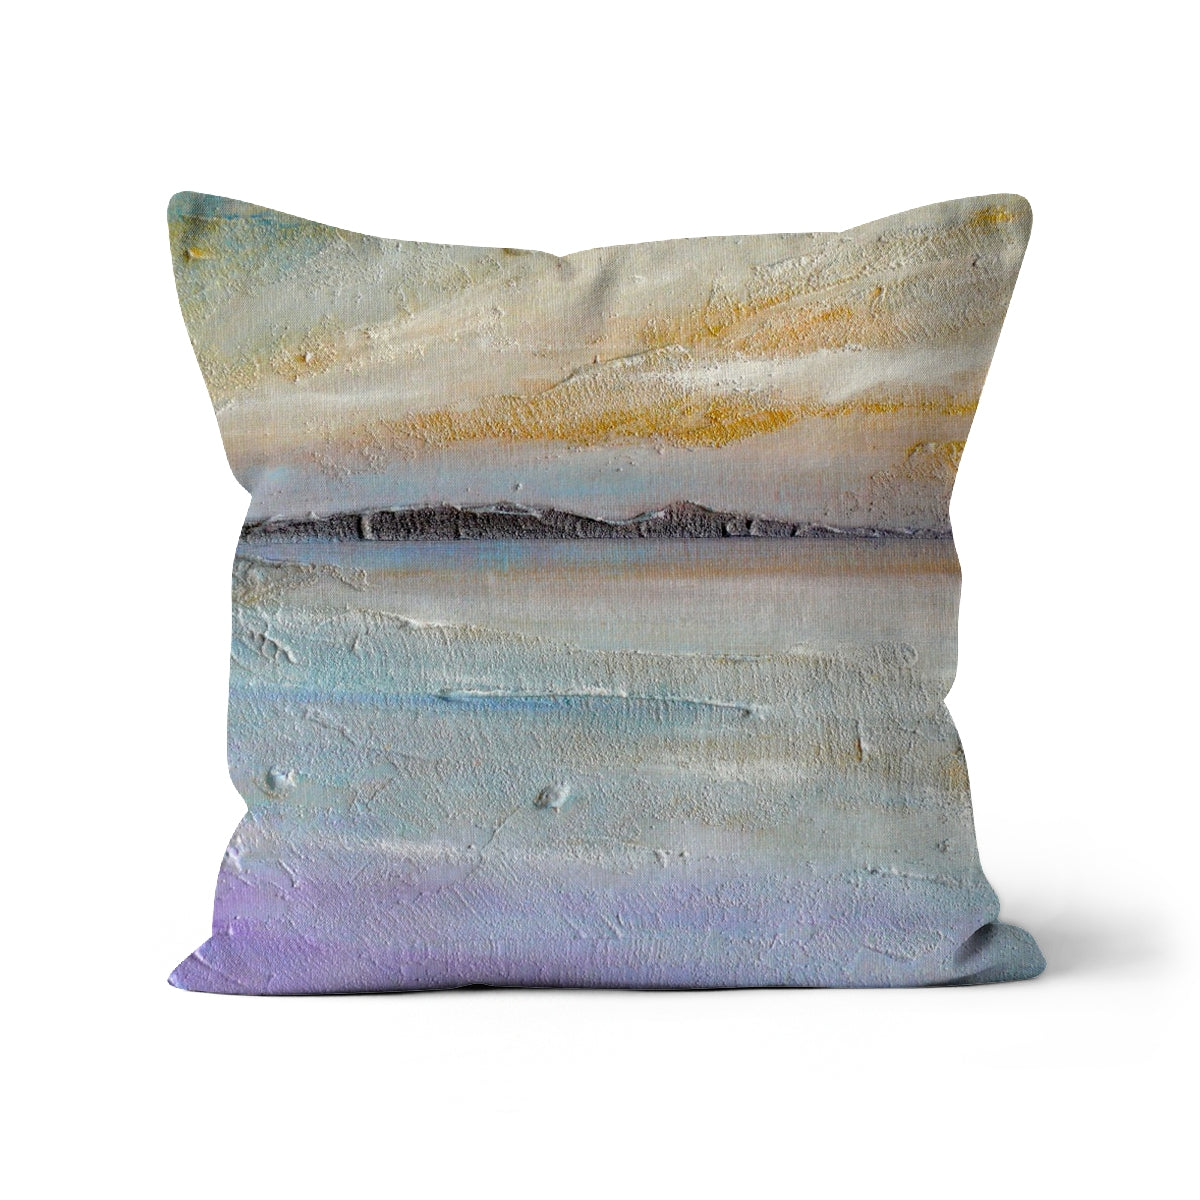 Sollas Beach South Uist Art Gifts Cushion-Cushions-Hebridean Islands Art Gallery-Linen-12"x12"-Paintings, Prints, Homeware, Art Gifts From Scotland By Scottish Artist Kevin Hunter